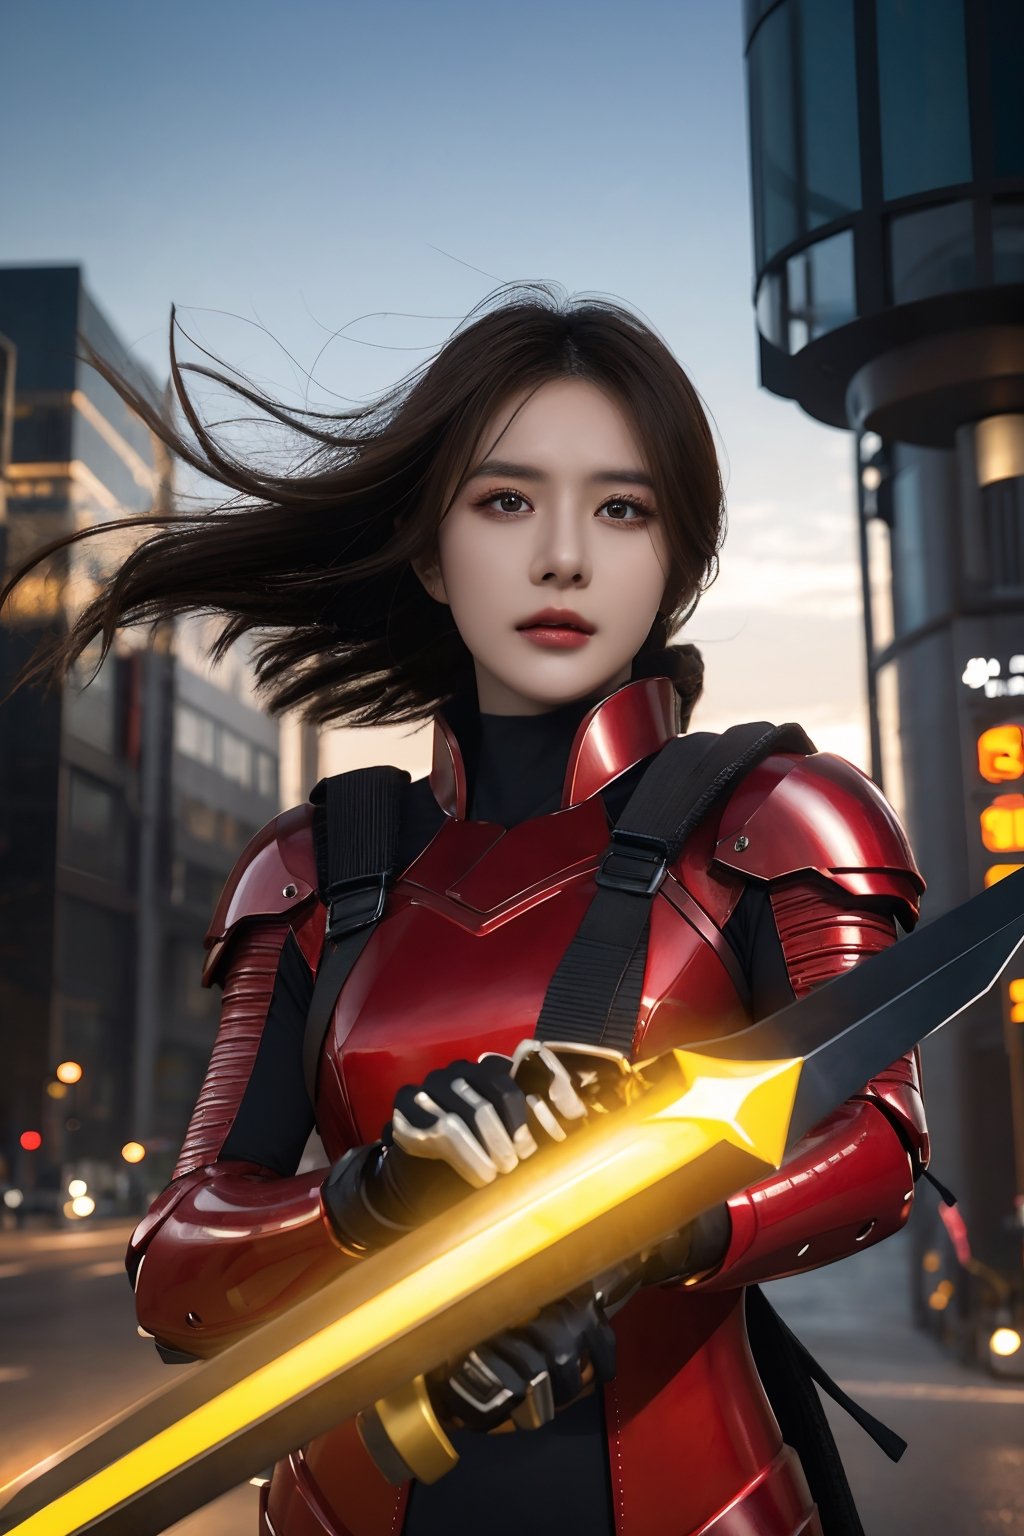 A captivating illustration of a female cyber samurai clad in striking red armor, exuding confidence and strength. Her sleek, futuristic helmet with a visor conceals her face, while she holds a high-tech sword with precision. The background is a blend of a futuristic cityscape, with flying grass and wind effects, creating a dynamic and immersive atmosphere. The overall composition is both bold and striking, with a strong sense of visual impact.,1 girl ,solo,beauty,girl,20 years old